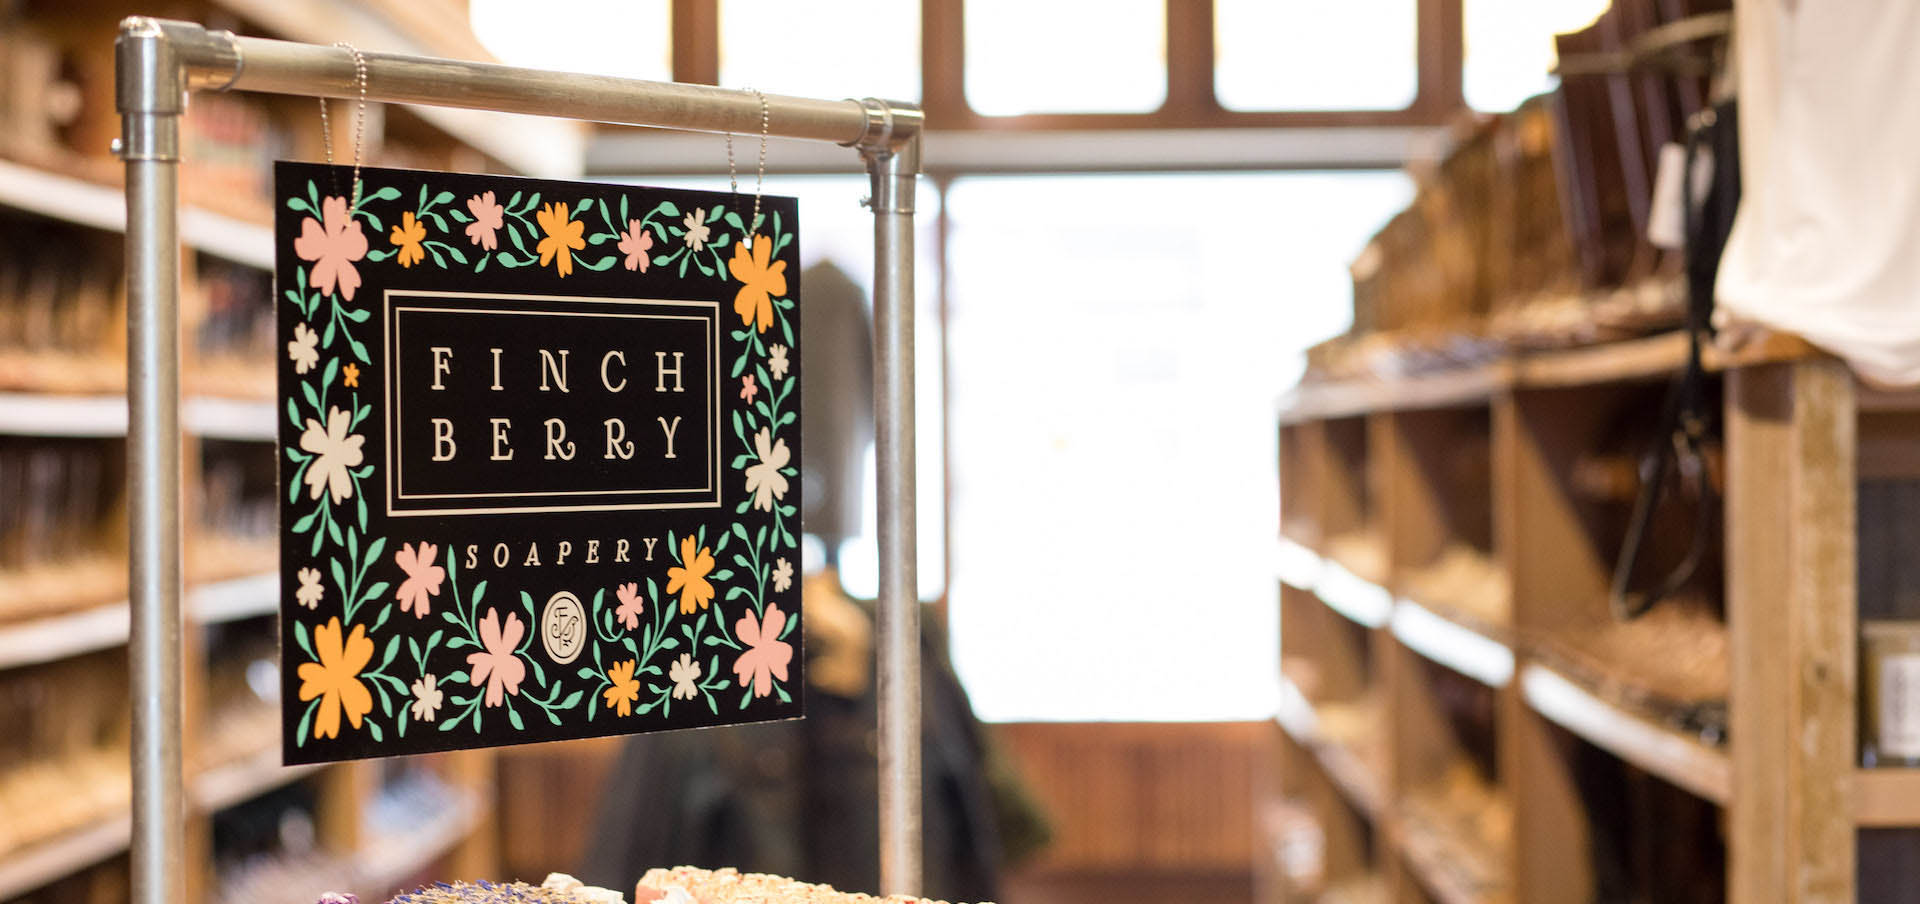 5 Reasons to Love Finchberry Soap: Available In-Store Now!